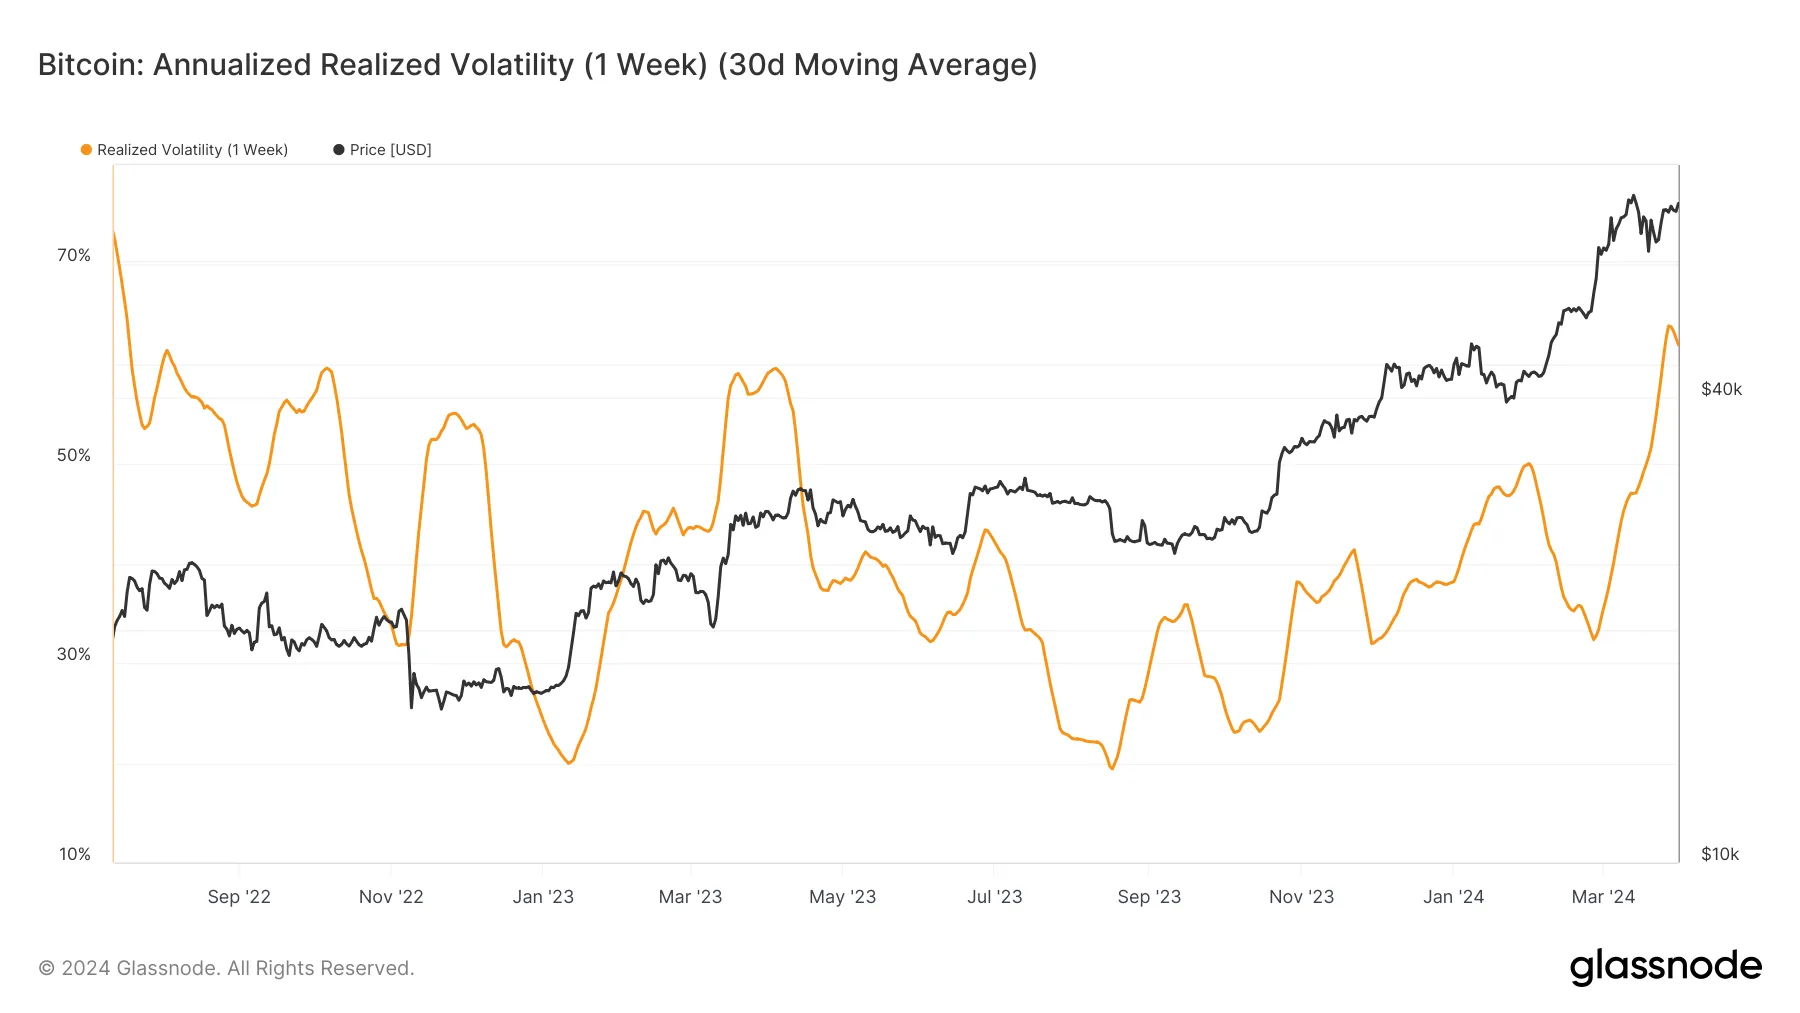 Bitcoin annualized realized volatility (1 Week, 30d Moving Average). Source: Glassnode